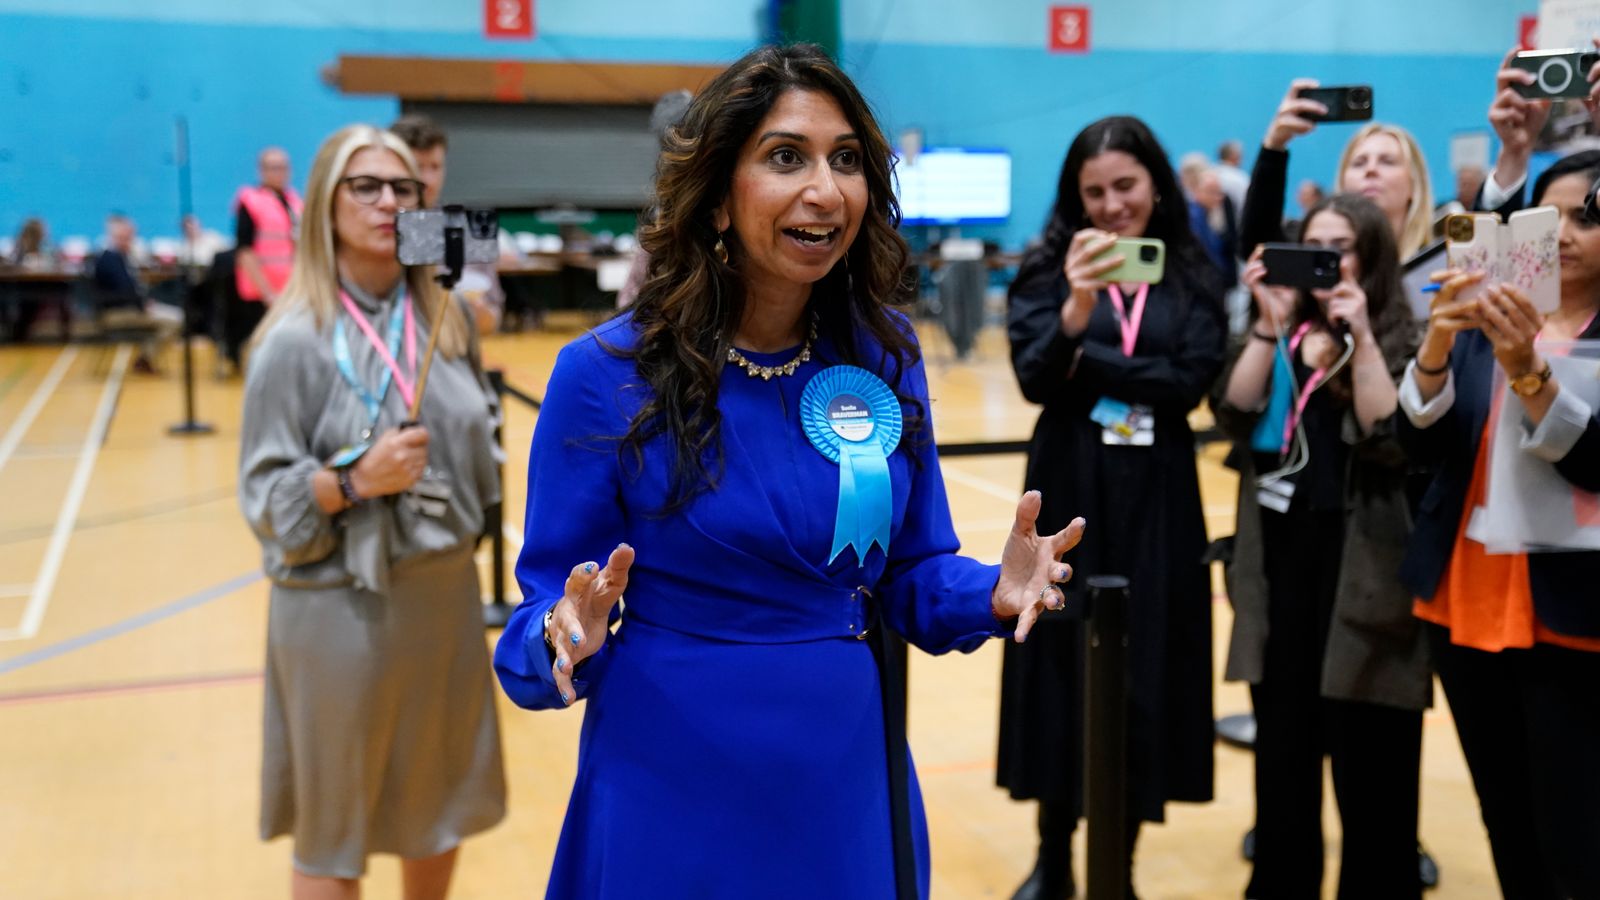 Suella Braverman says Tories ‘mimicked’ Labour and ‘disrespected’ grassroots in brutal attack on Rishi Sunak | Politics News